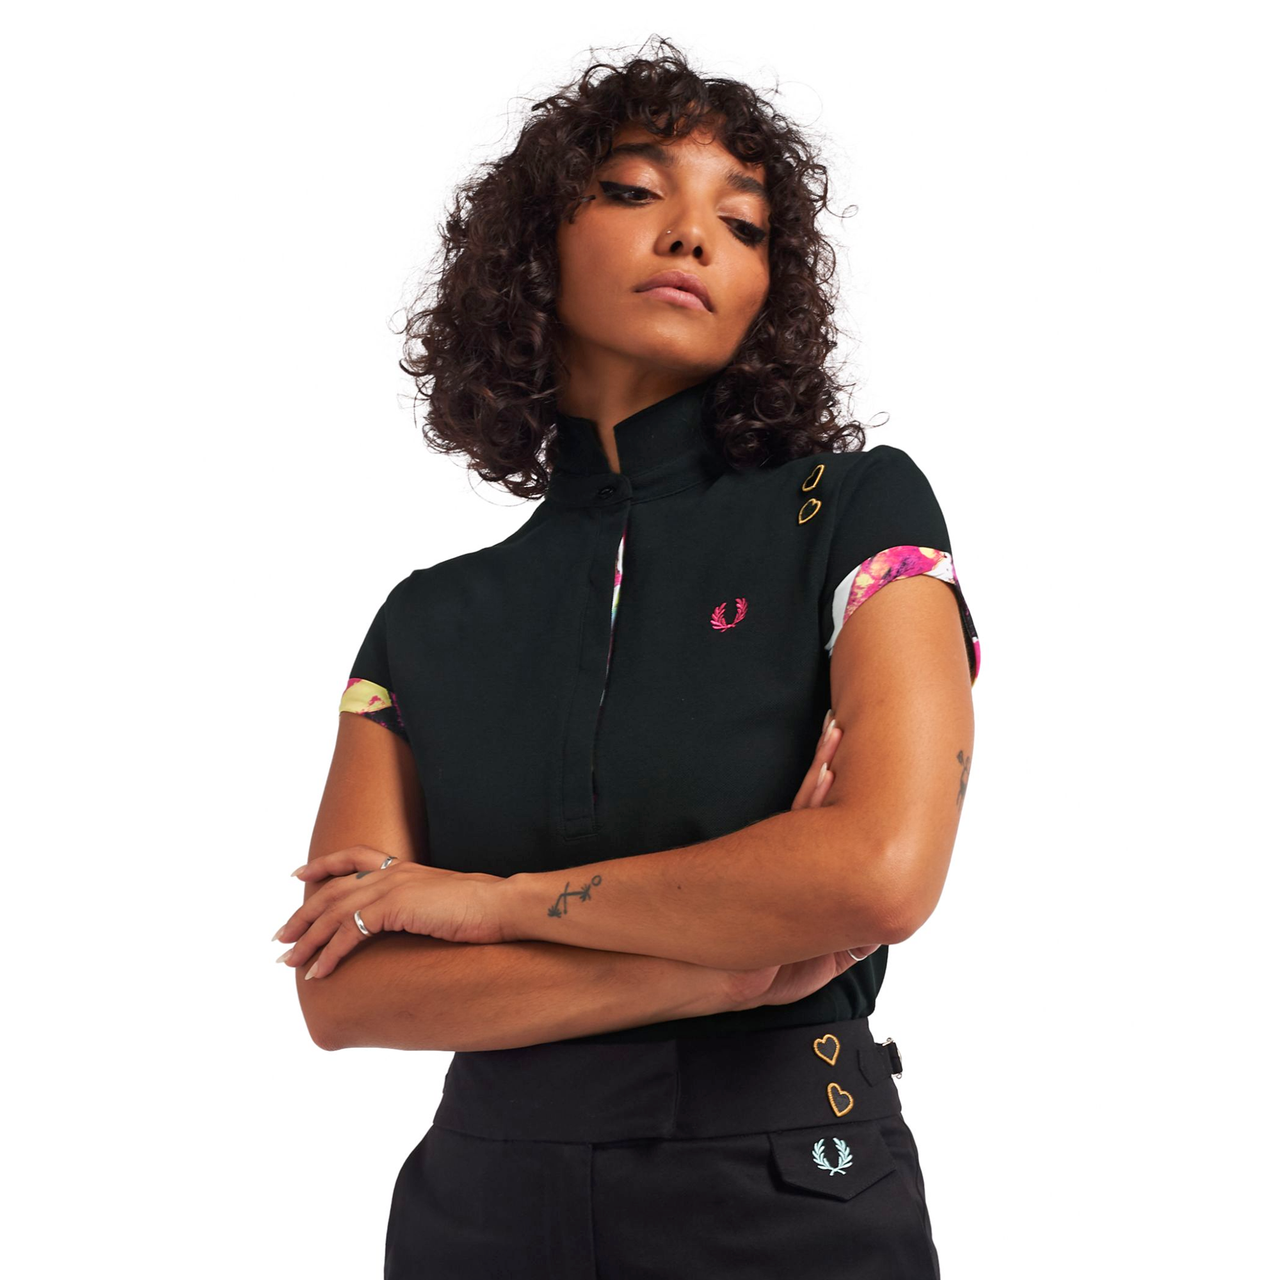 FRED PERRY AMY WINEHOUSE CONTRAST TRIM PIQUE POLO SHIRT